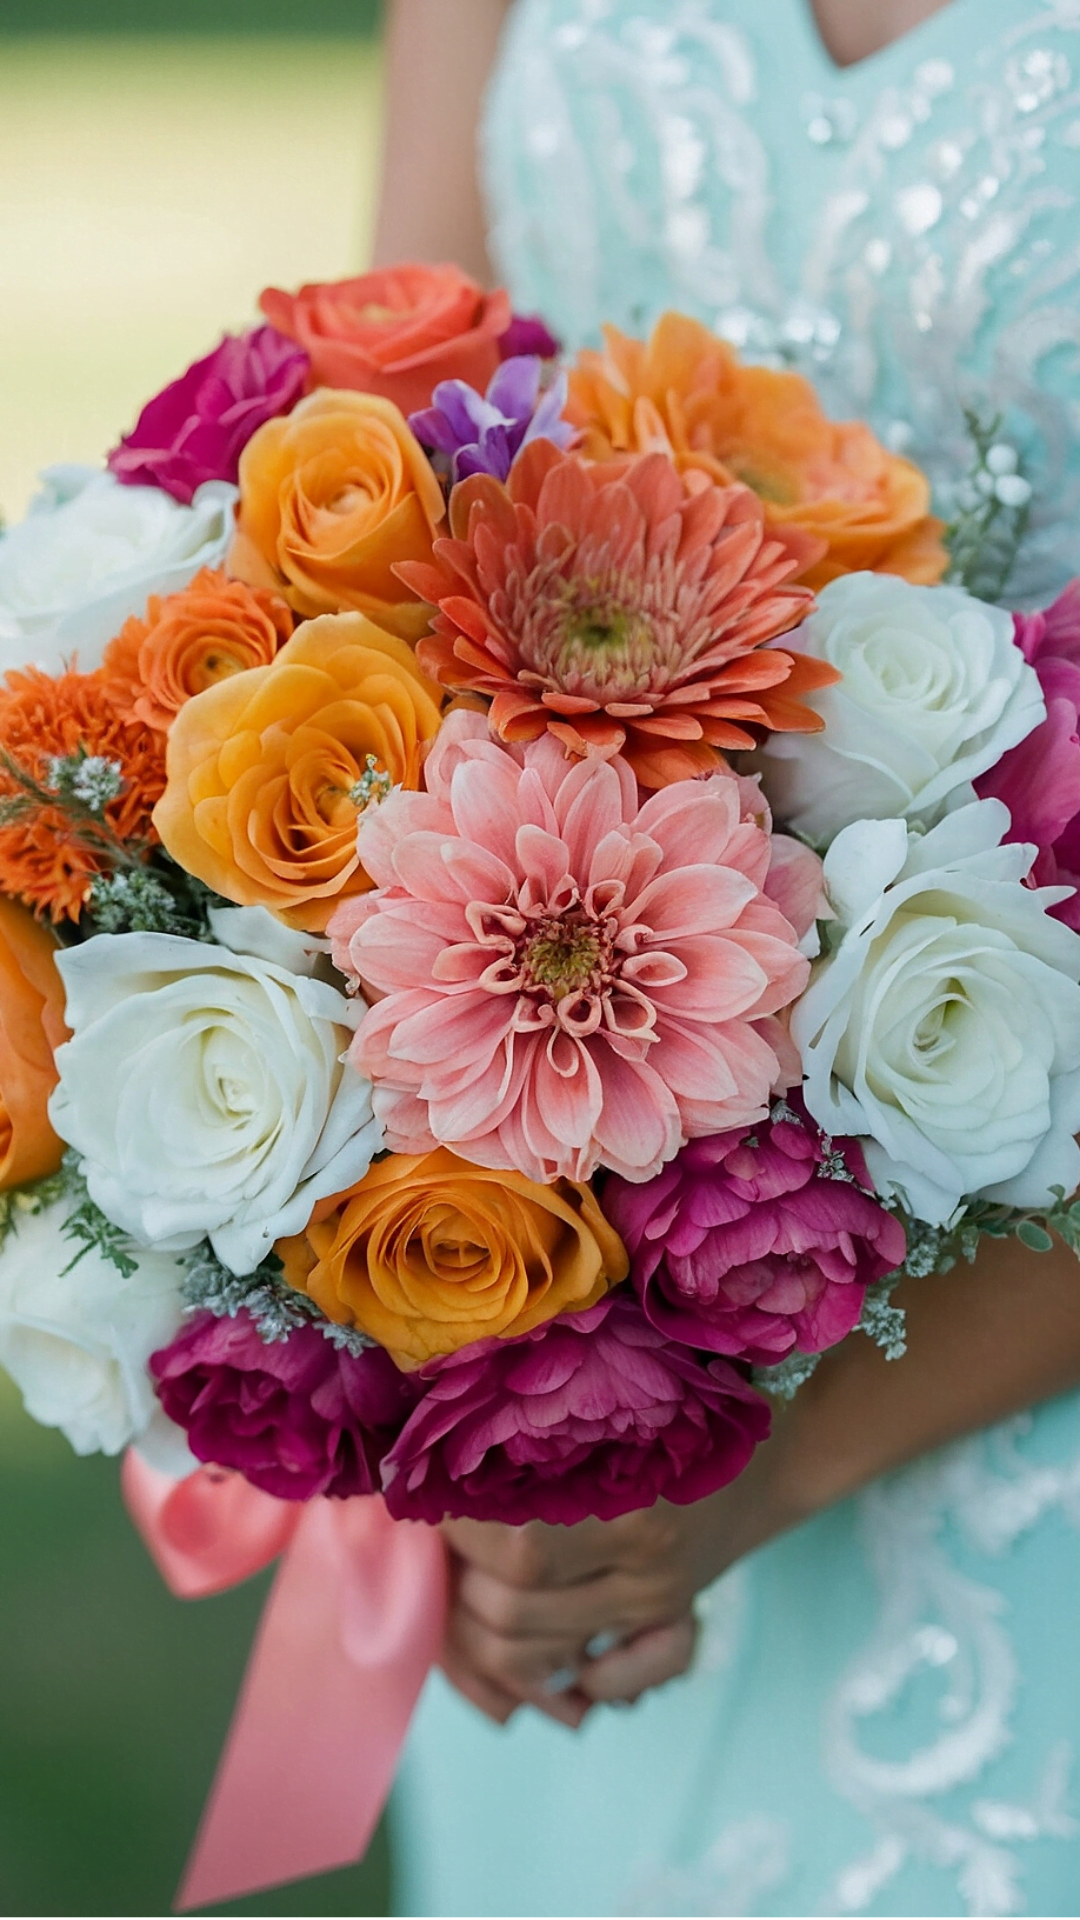 Prom Bouquet Inspirations: From Pastels to Bold Colors